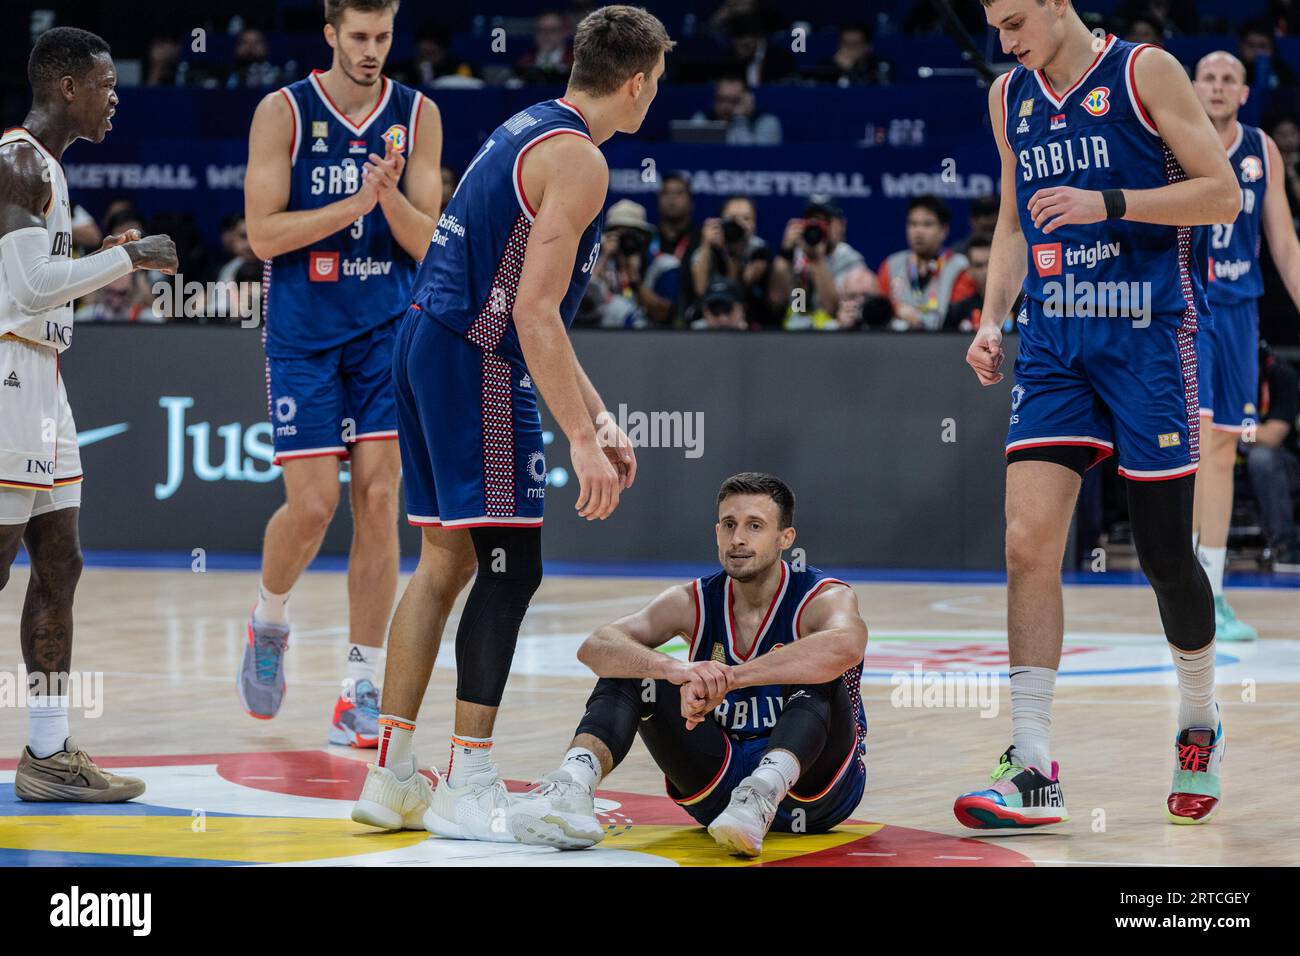 Aleksa Avramovic of Serbia seen in action during the finals of the FIBA Basketball World Cup 2023 between Serbia and Germany at the Mall of Asia Arena-Manila. Final score: Germany 83:77 Serbia. Stock Photo